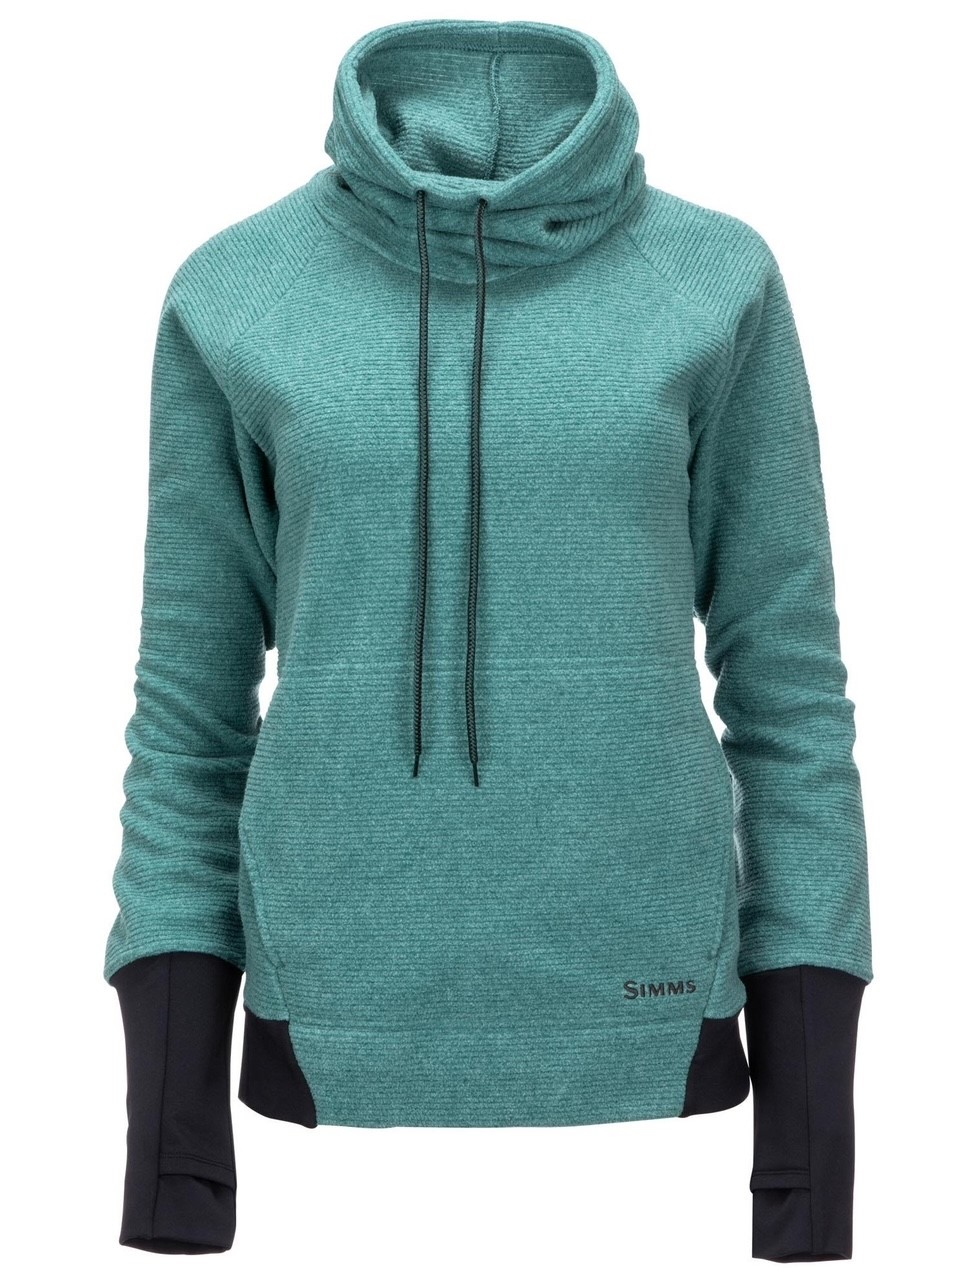 Simms W's Rivershed Hoody - Avalon Teal - Extra Large